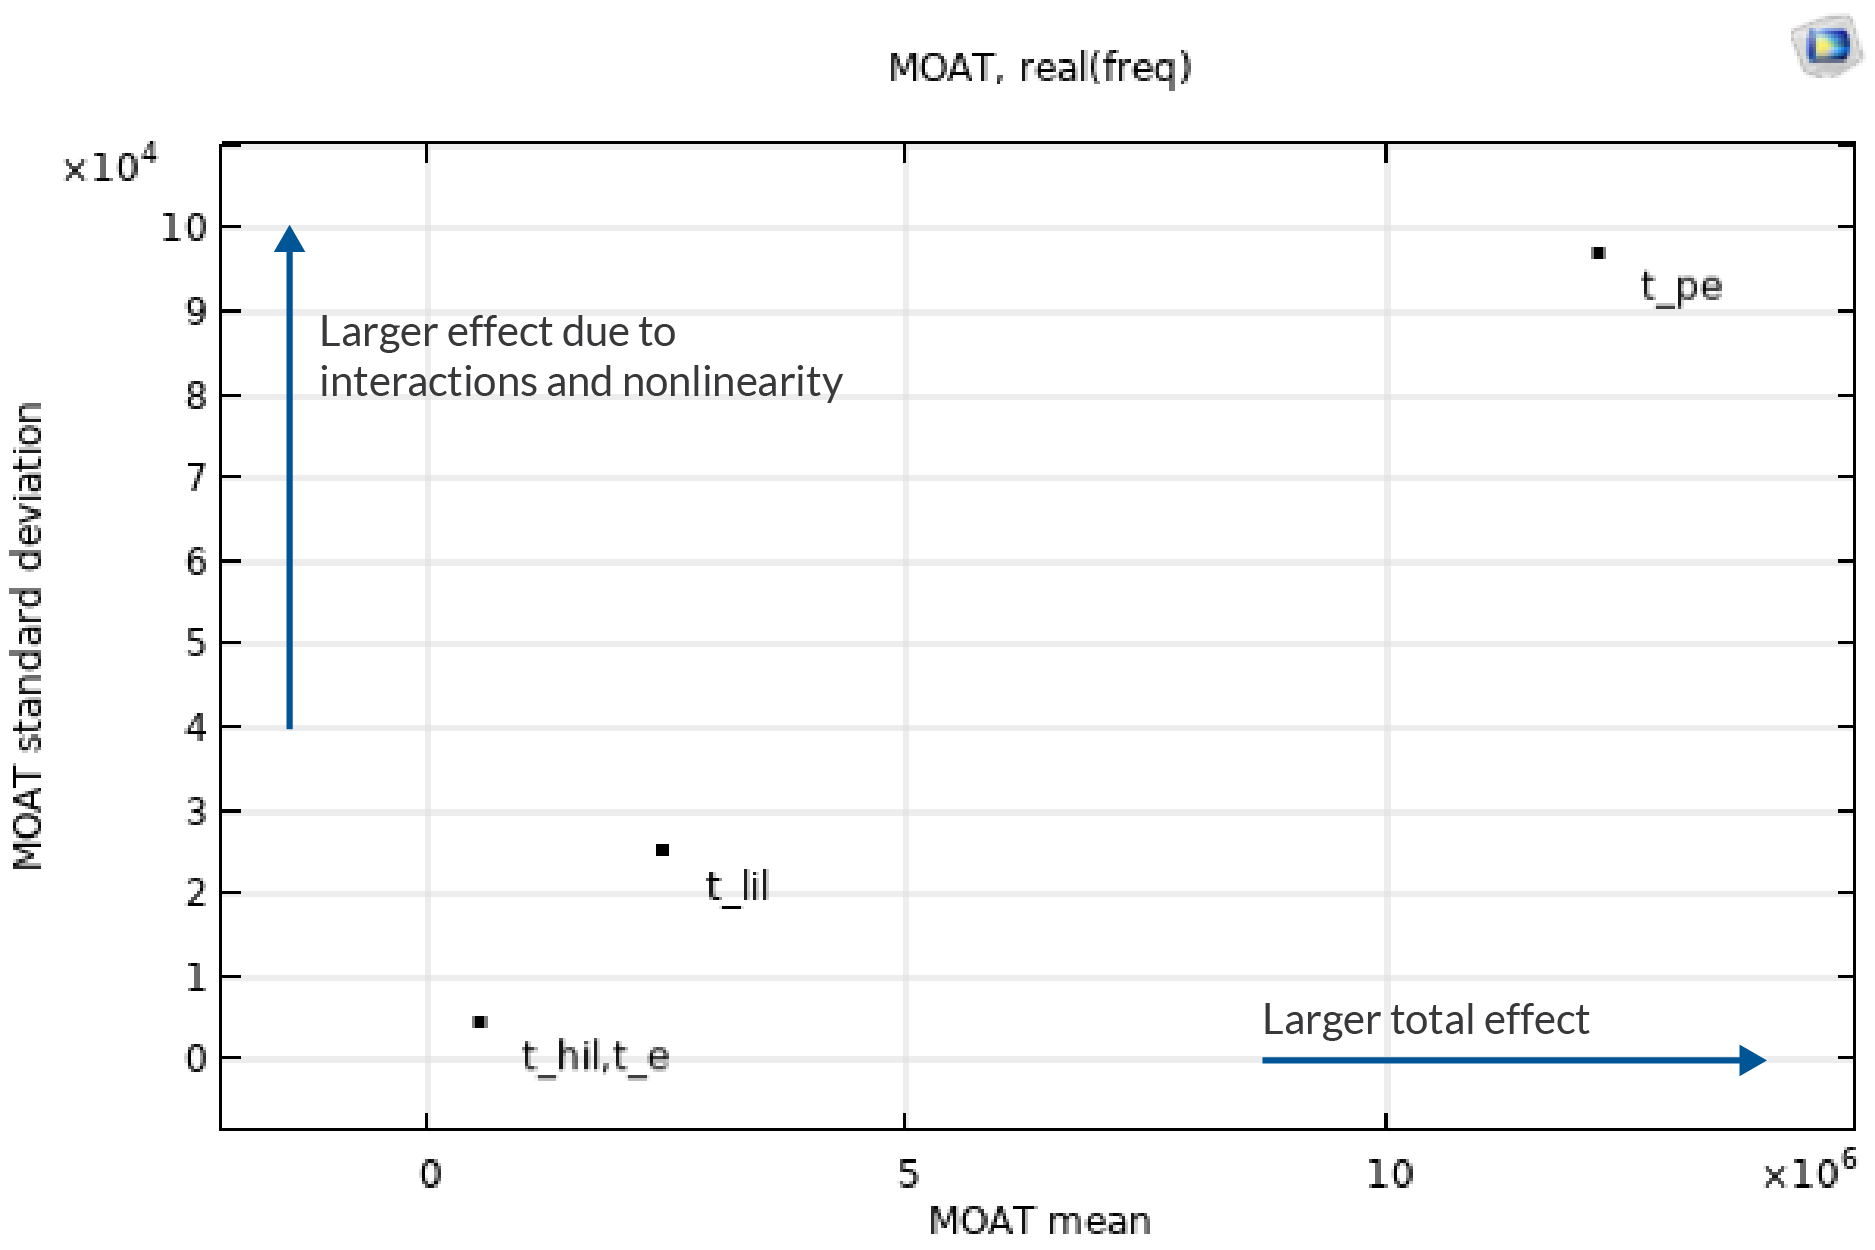 A 1D plot that contains black dots representing input parameters, with the MOAT mean on the x-axis and the MOAT standard deviation on the y-axis.